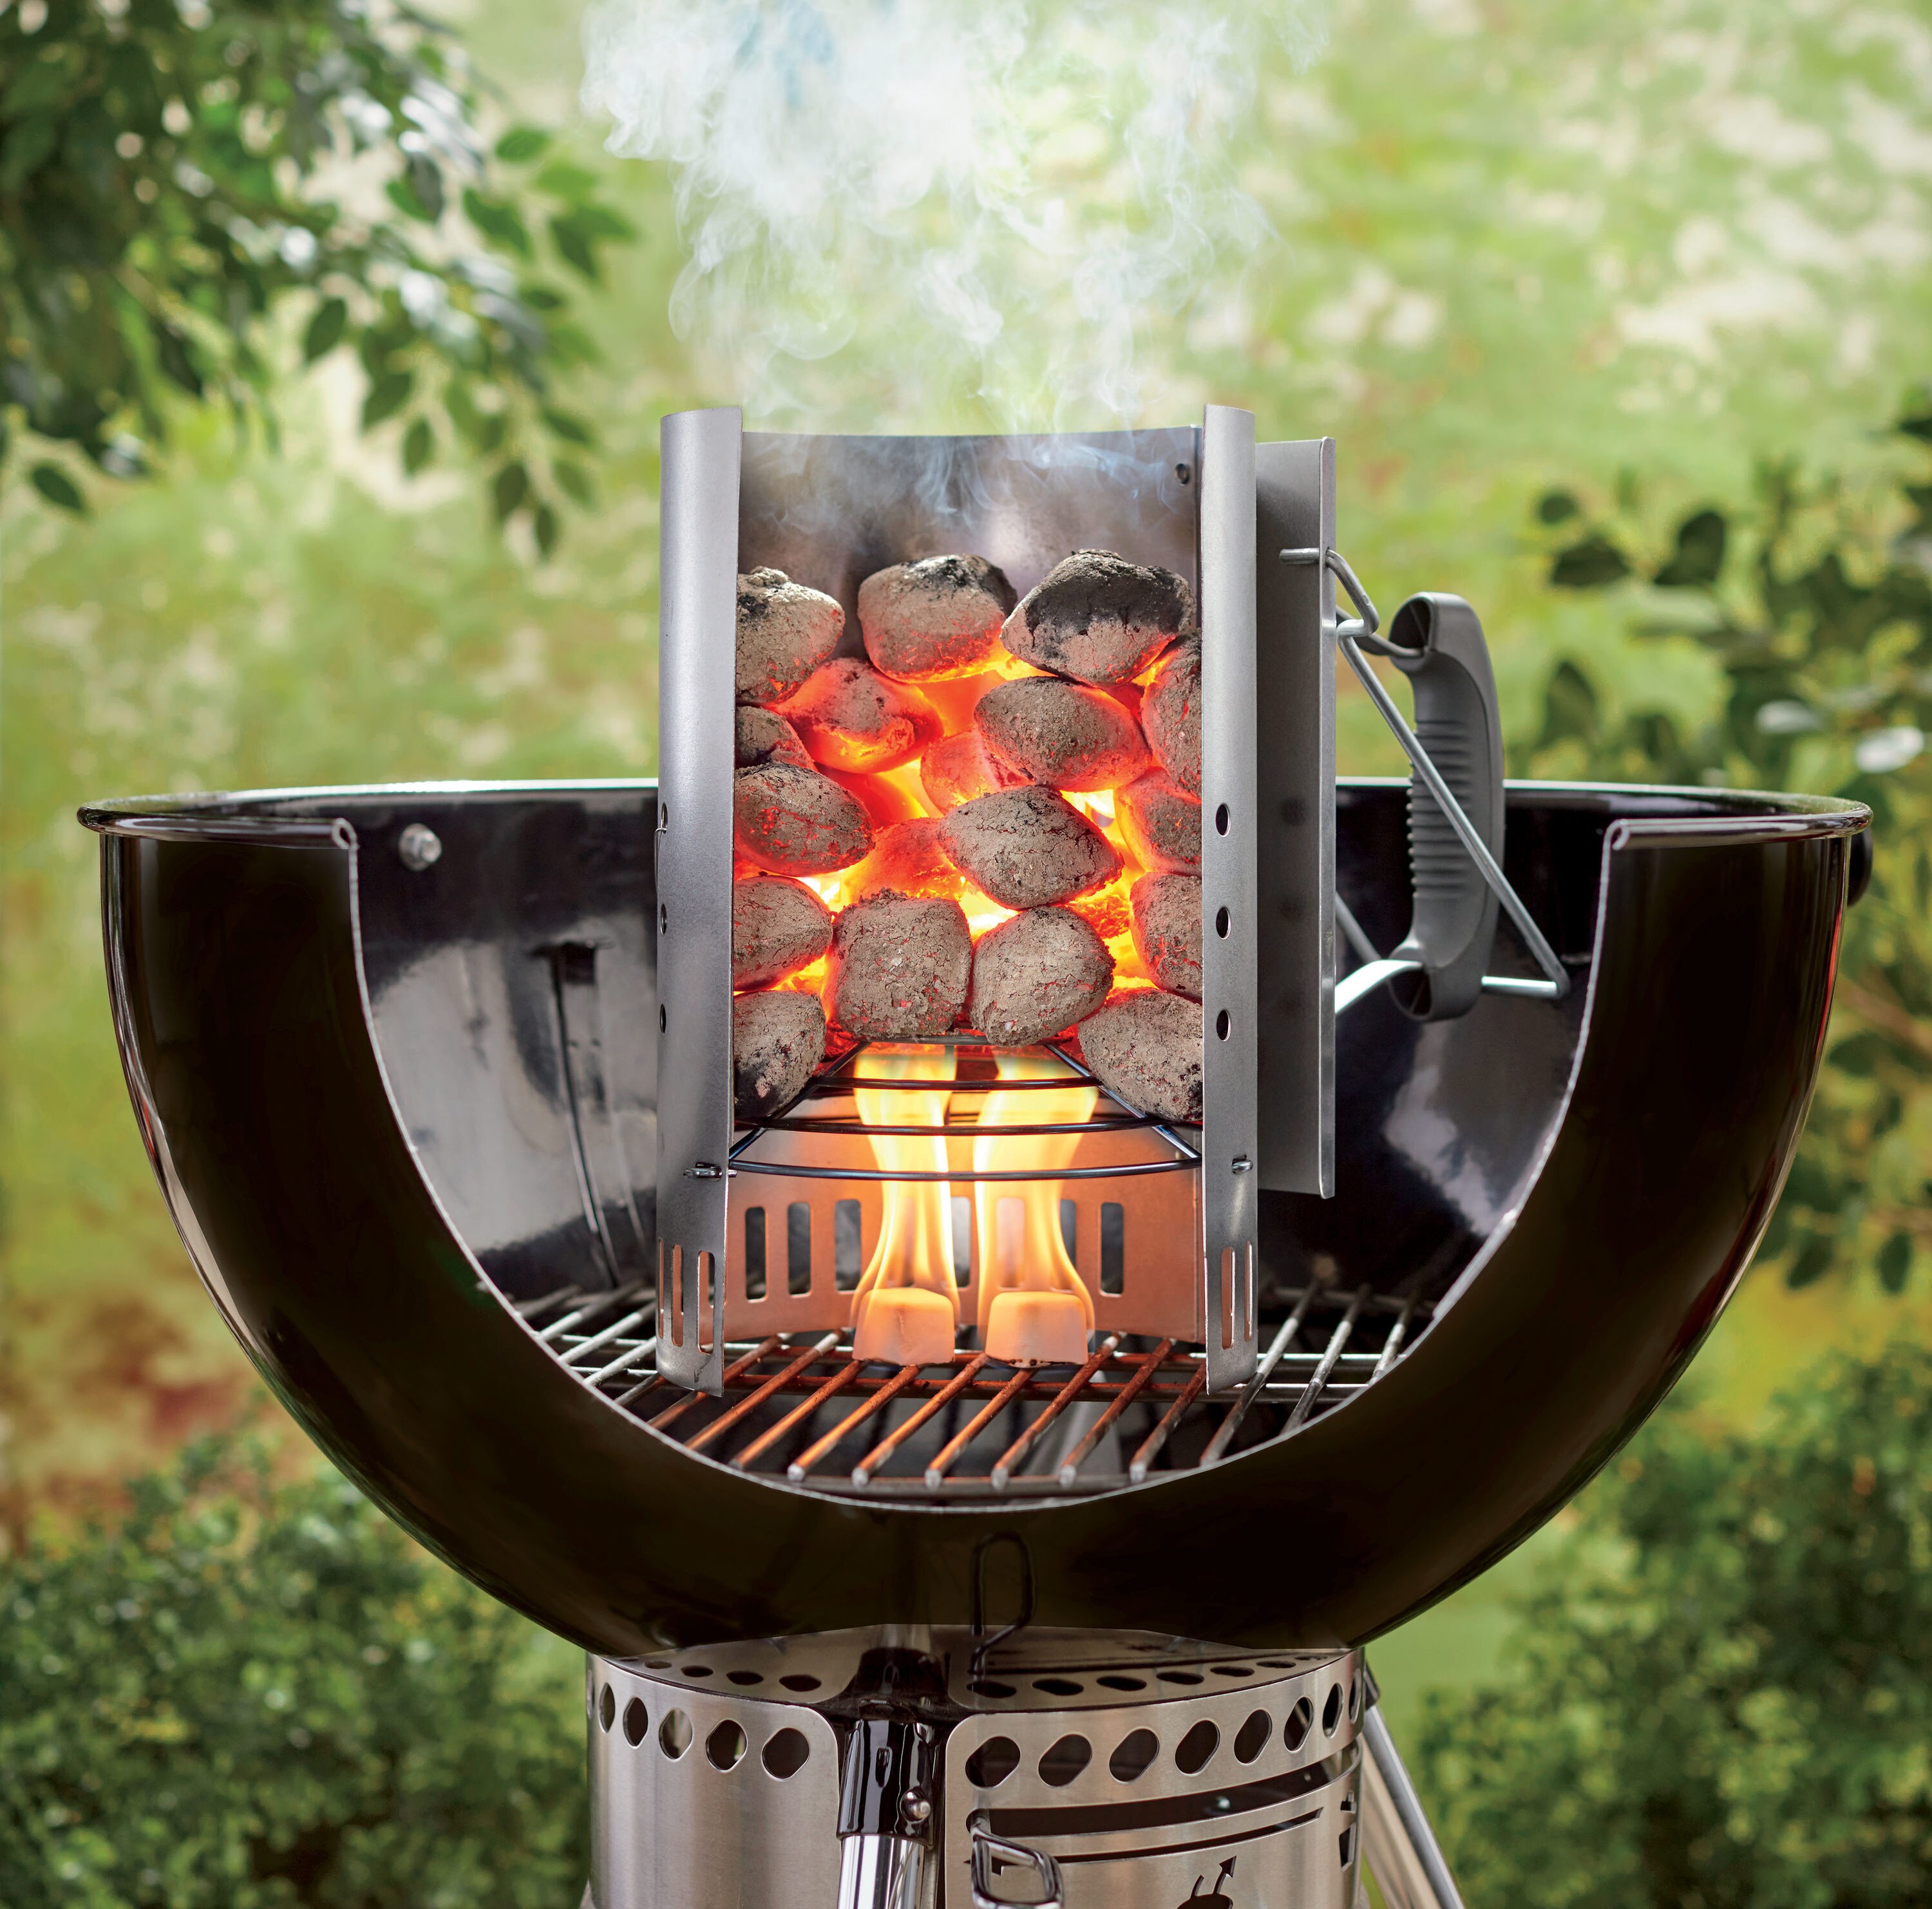 BBQ GRILL CHARCOAL CHIMNEY STARTER Outdoor Resistant Heat Fire Quick Lighter New 